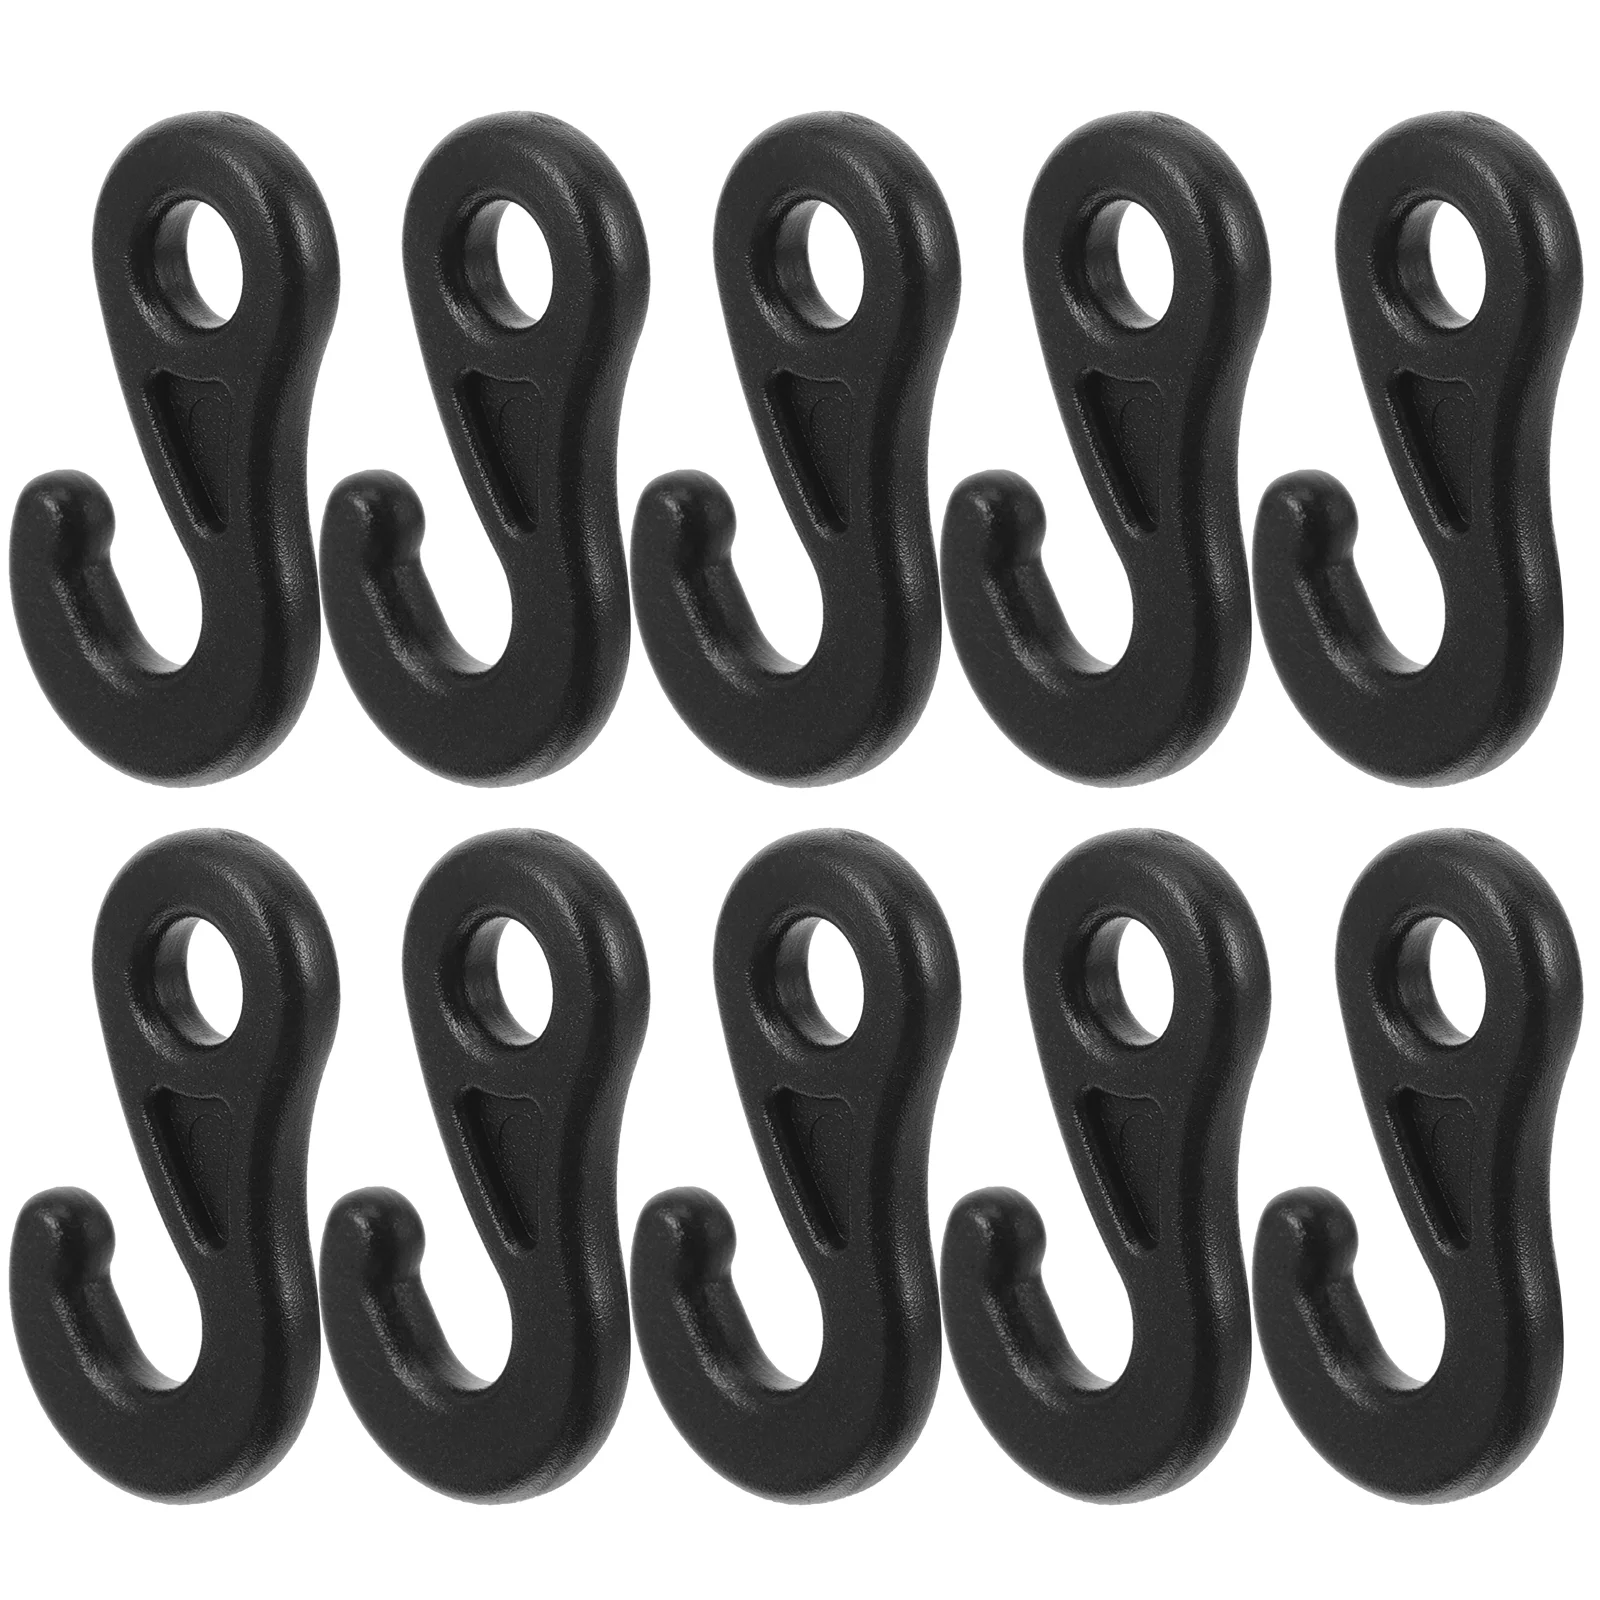 

10 Pcs Outdoor Canopy Tent Question Mark Light Hook Ground Nail Wind Rope Connection Pom9 10pcs (black) Tents Hiking Hooks